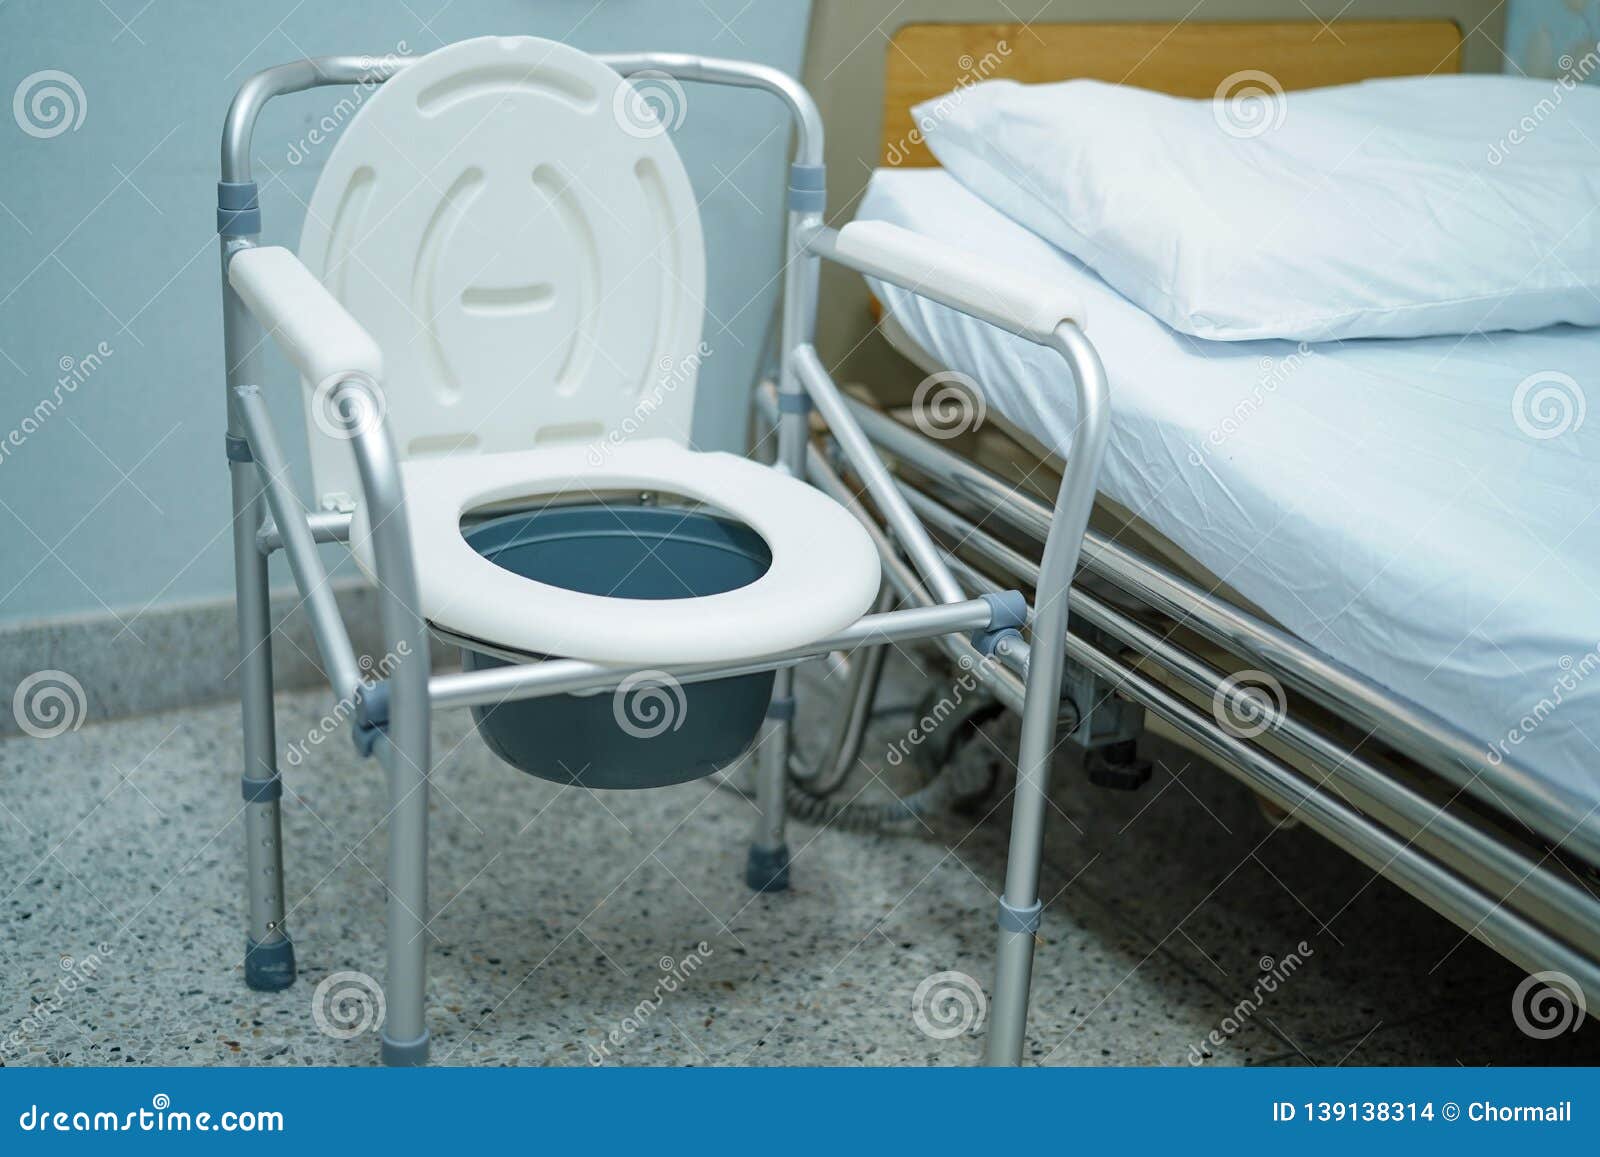 commode chair or mobile toilet can moving in bedroom or everywhere for elderly old disabled people or patient